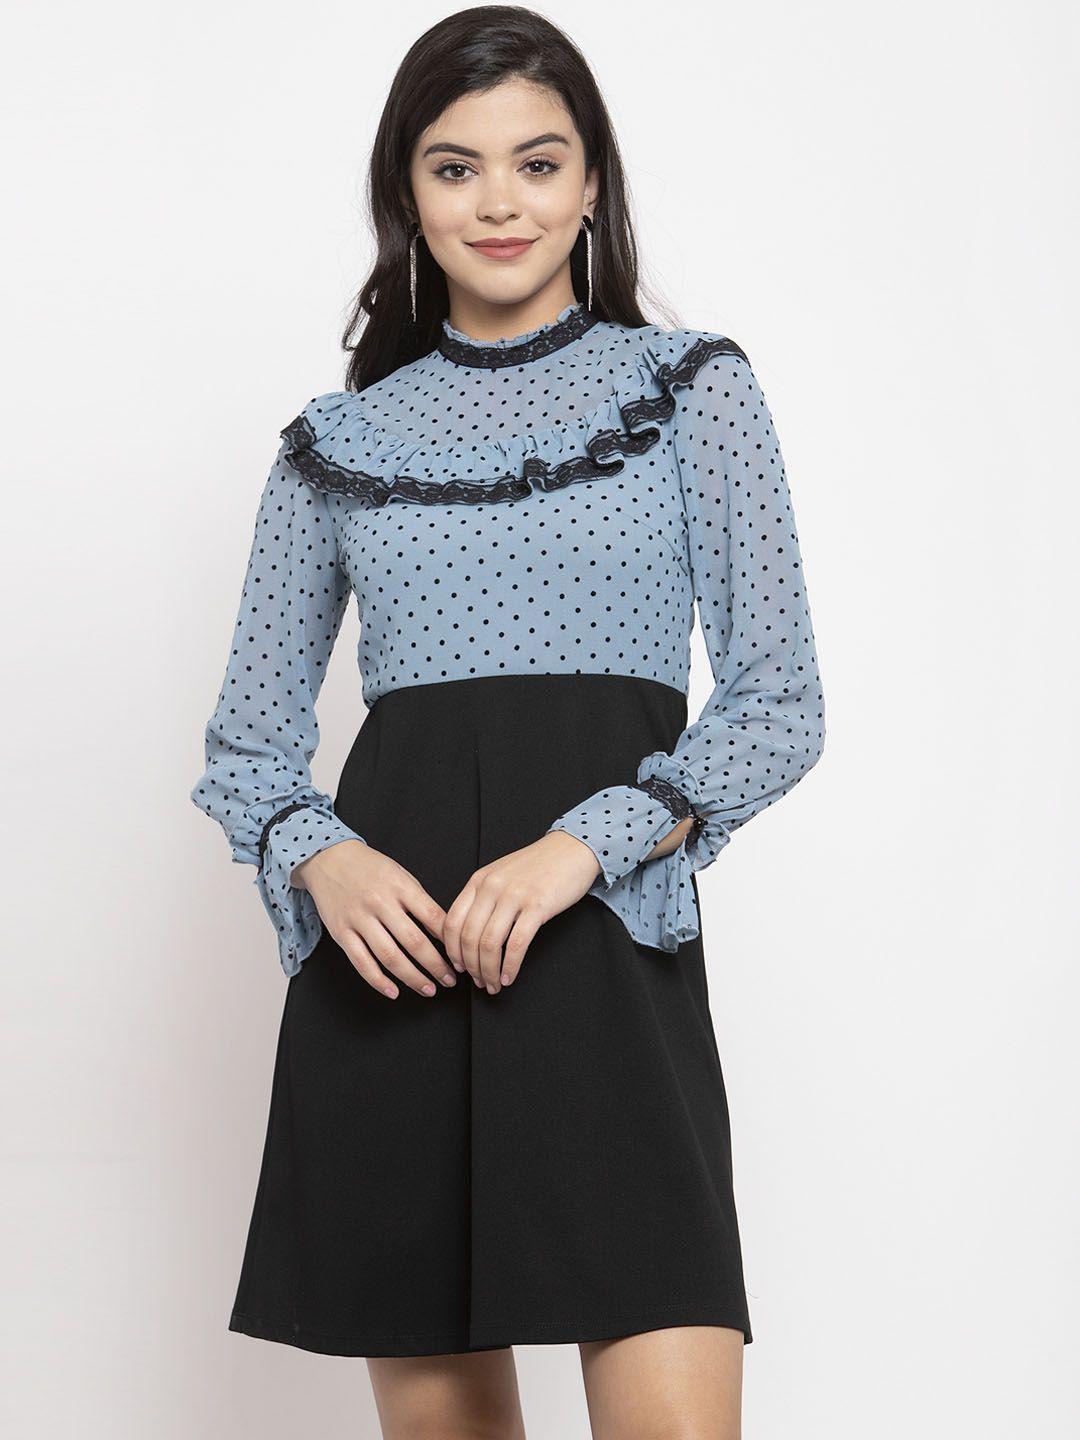 kassually-women-blue-&-black-printed-fit-and-flare-dress